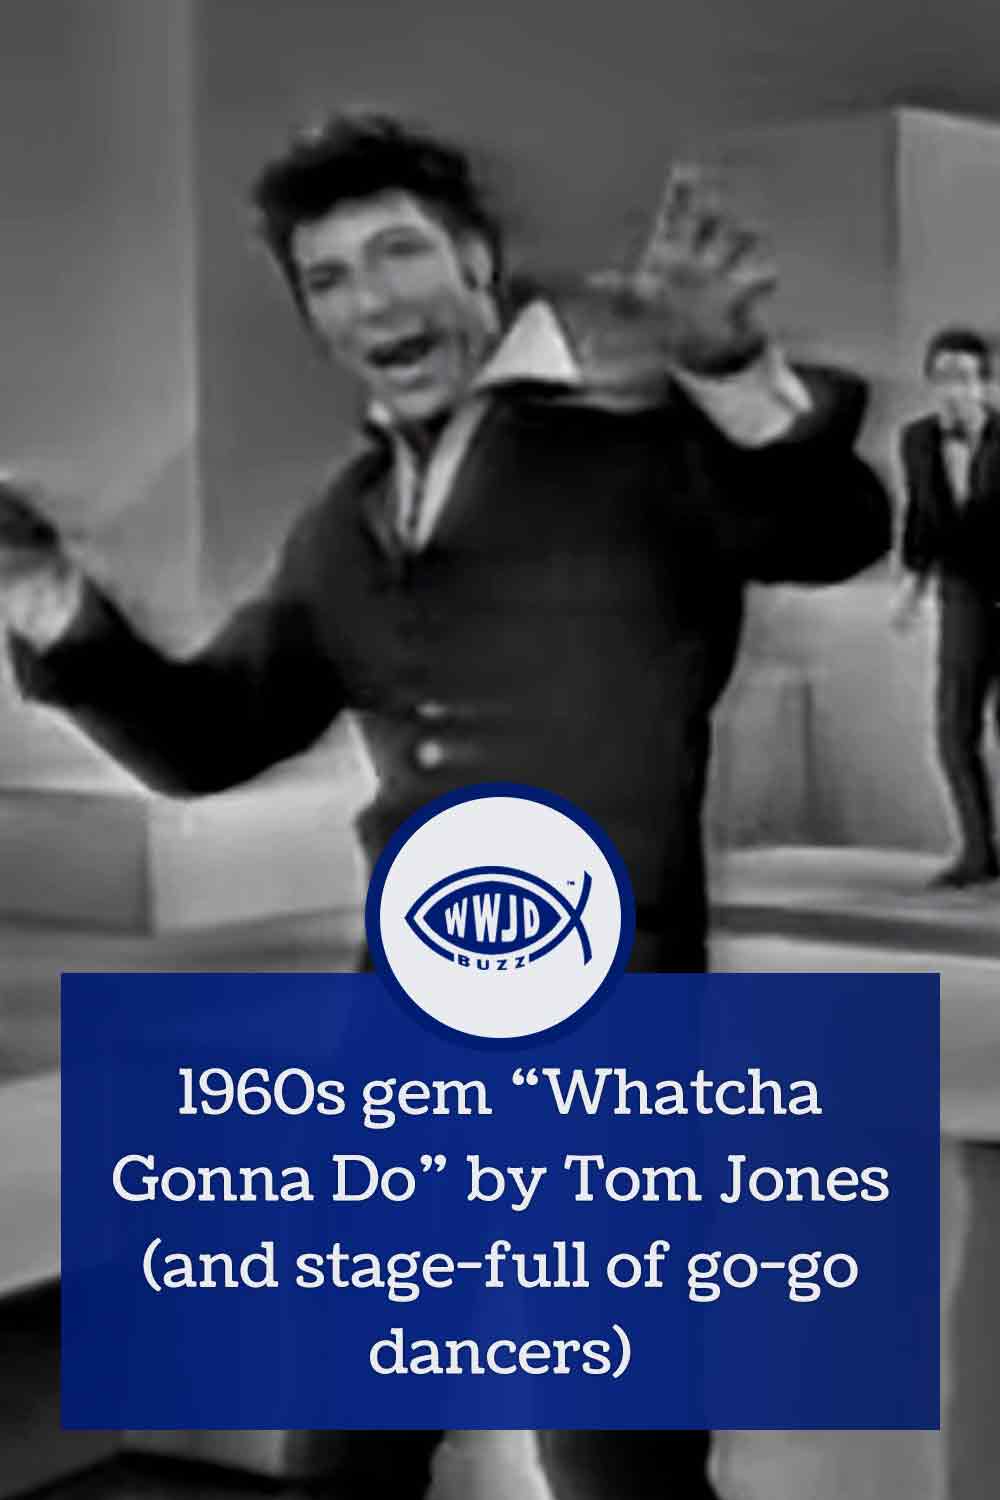 1960s gem “Whatcha Gonna Do” by Tom Jones (and stage-full of go-go dancers)